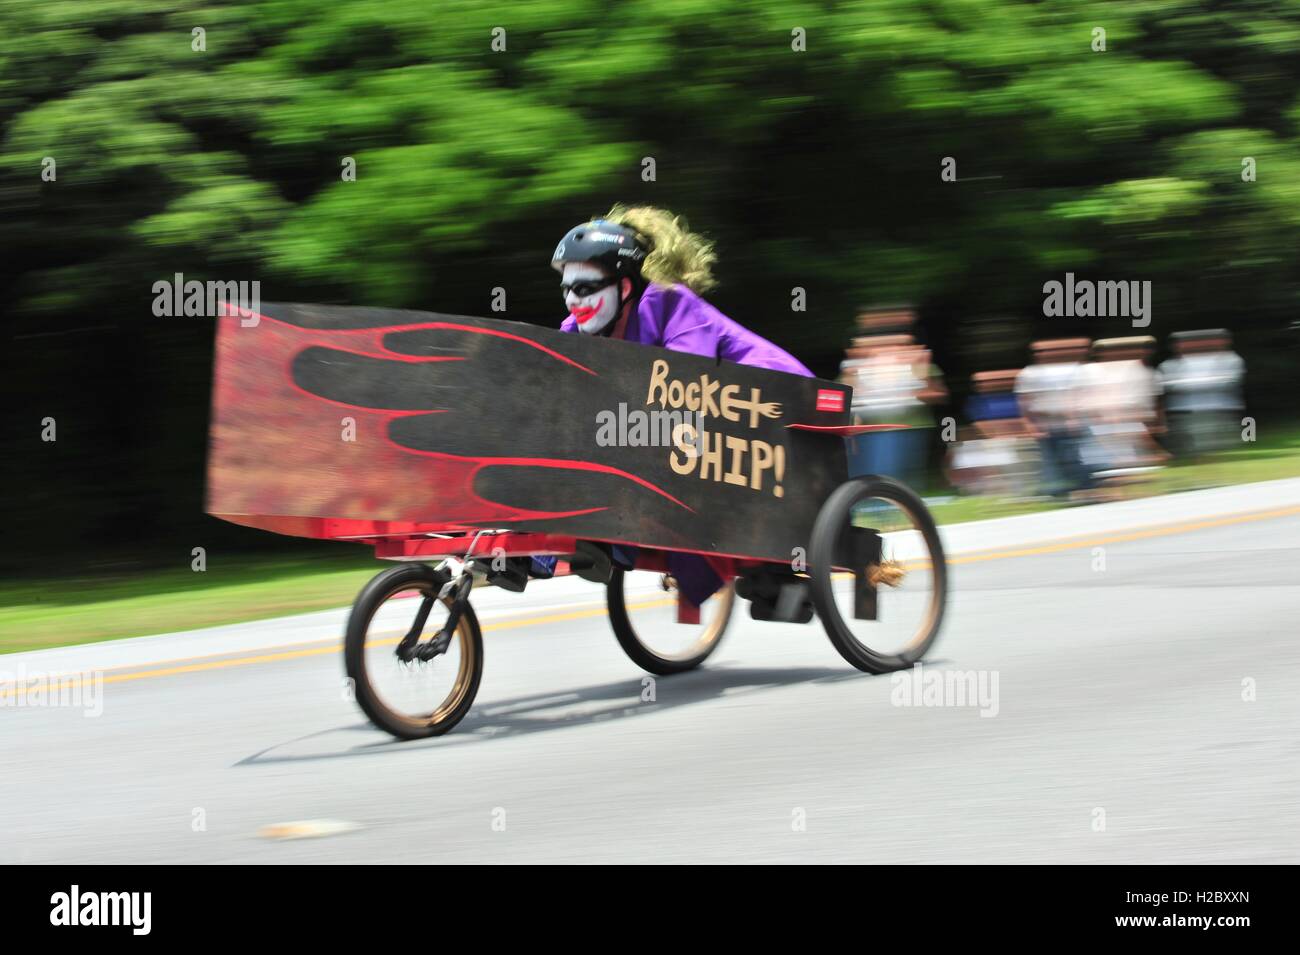 A woman in Joker facepaint rides her homemade soapbox derby race car painted 'Rocket Ship' down a hill on Douglas Boulevard during the American Red Cross Derby Day May 1, 2010 at the Kadena Air Base in Okinawa City, Okinawa, Japan. Stock Photo